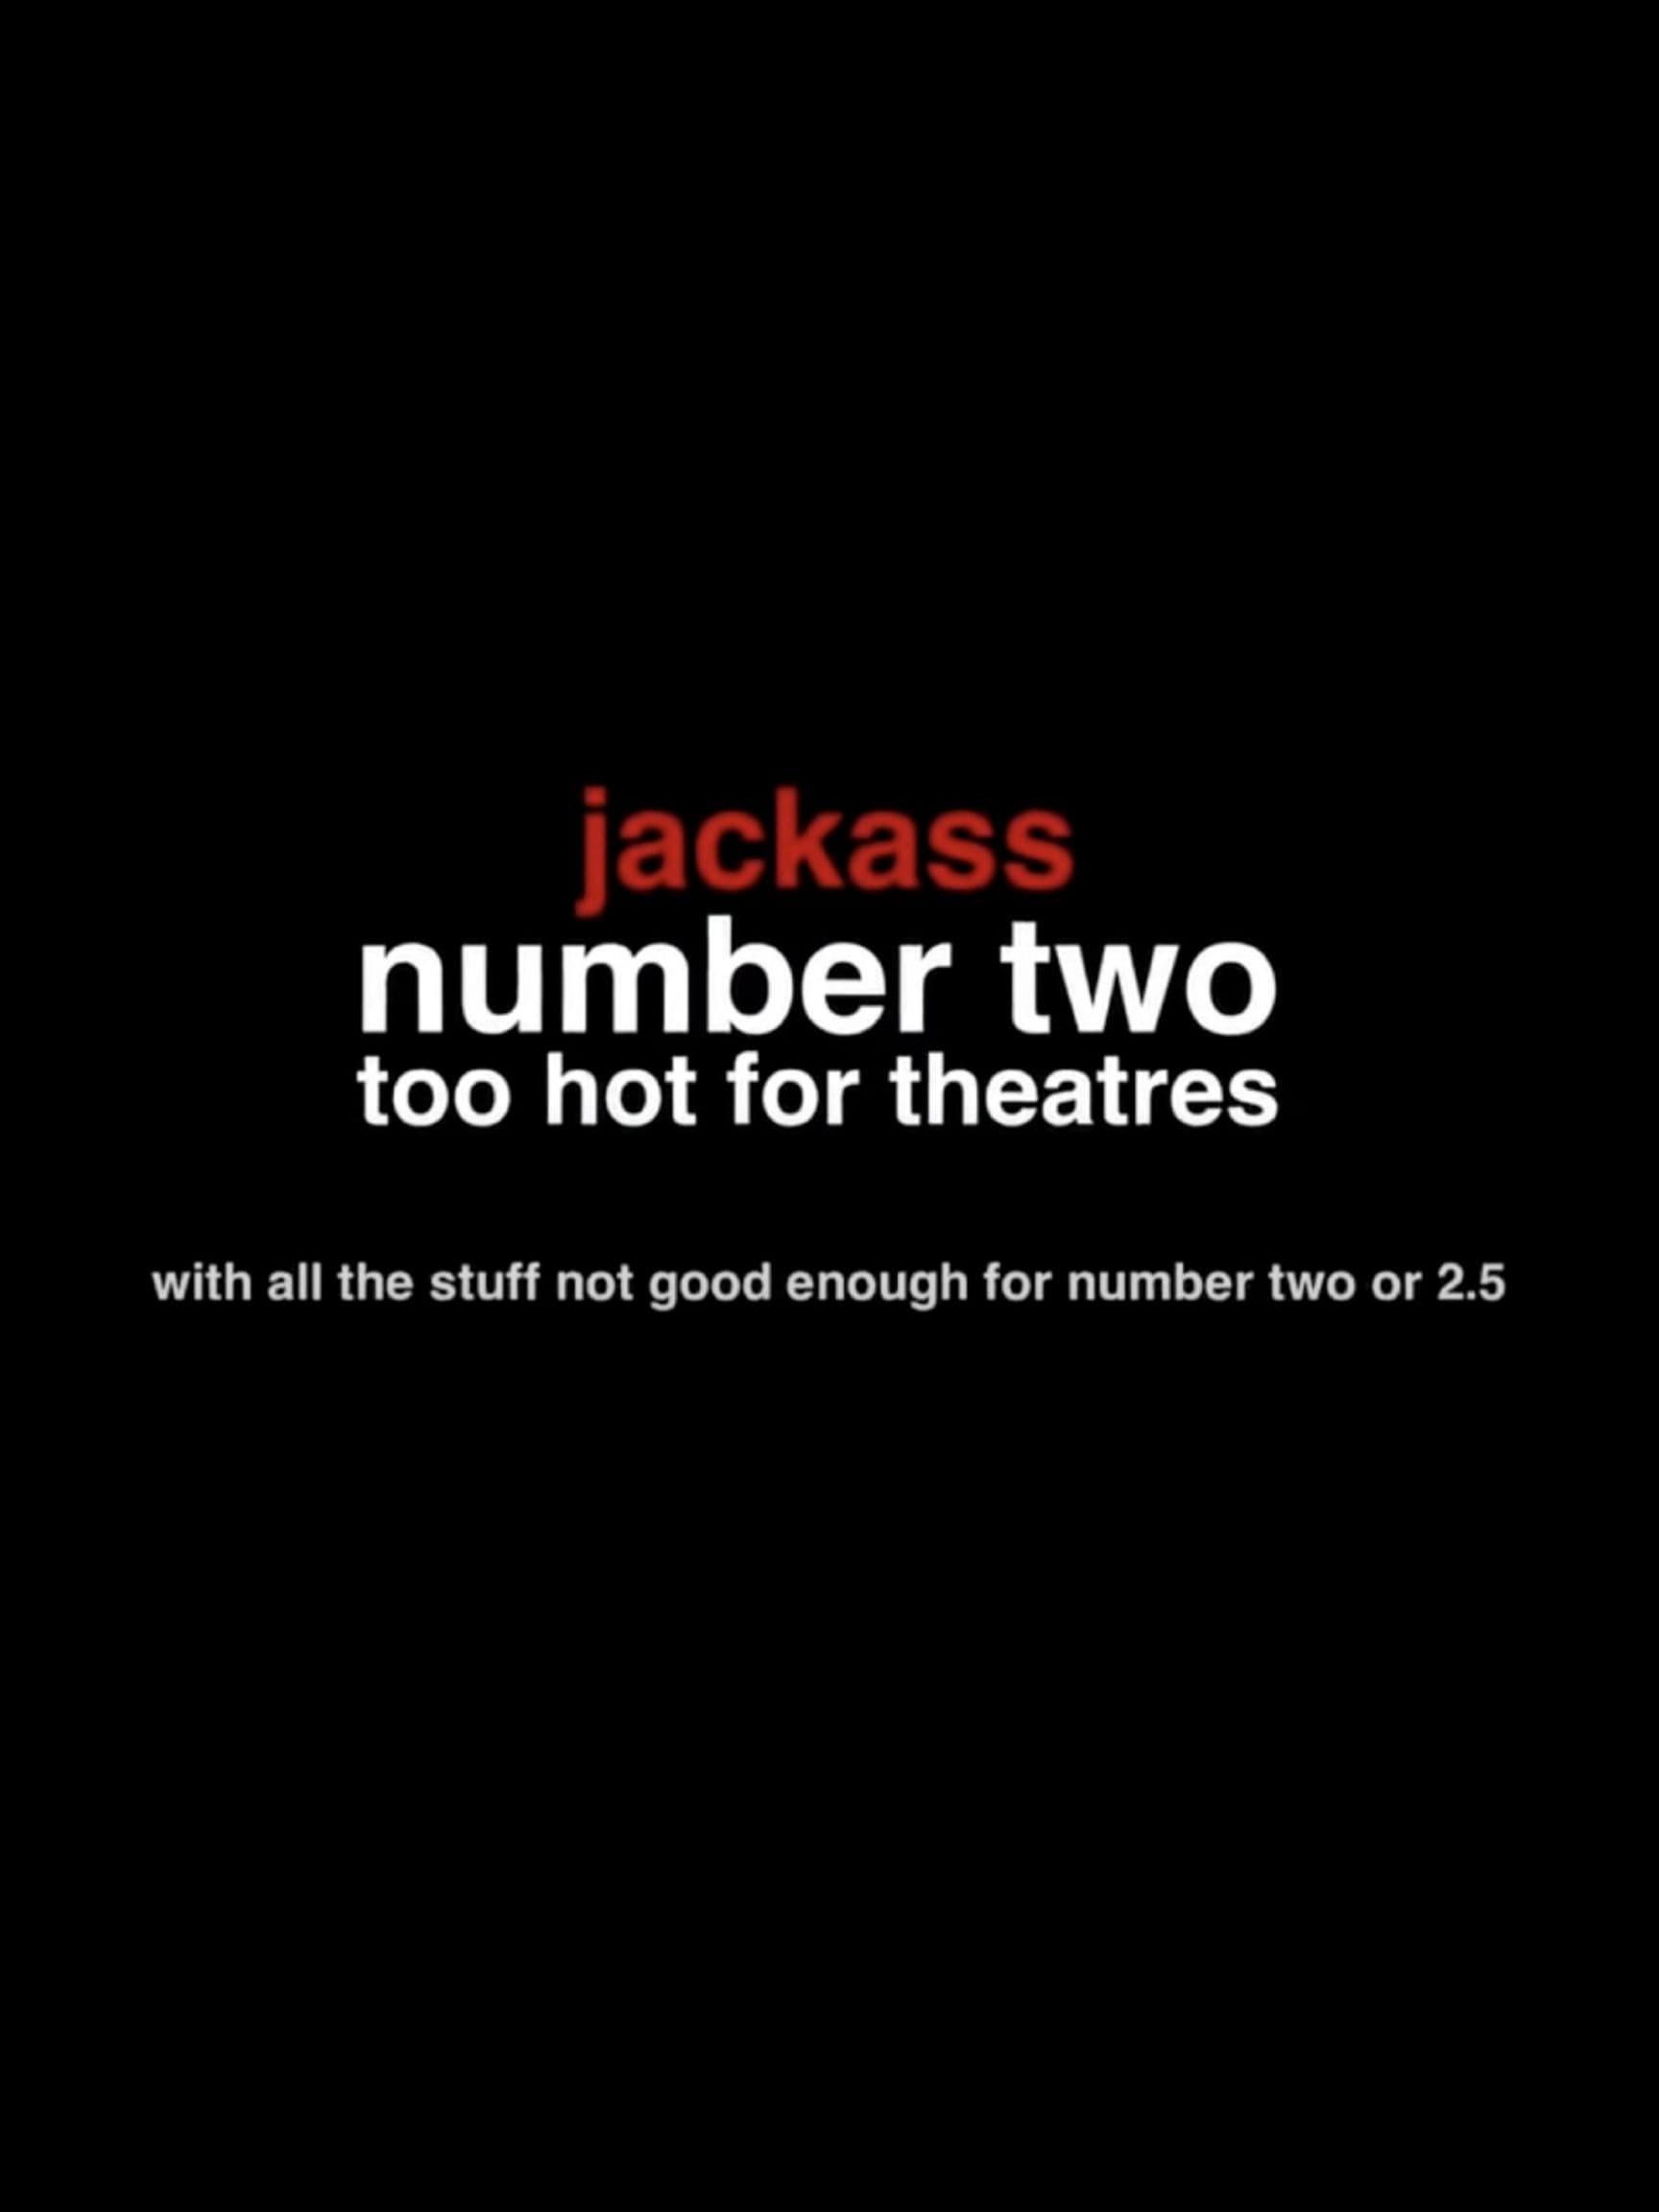 Jackass Number Two: Too Hot for Theaters poster